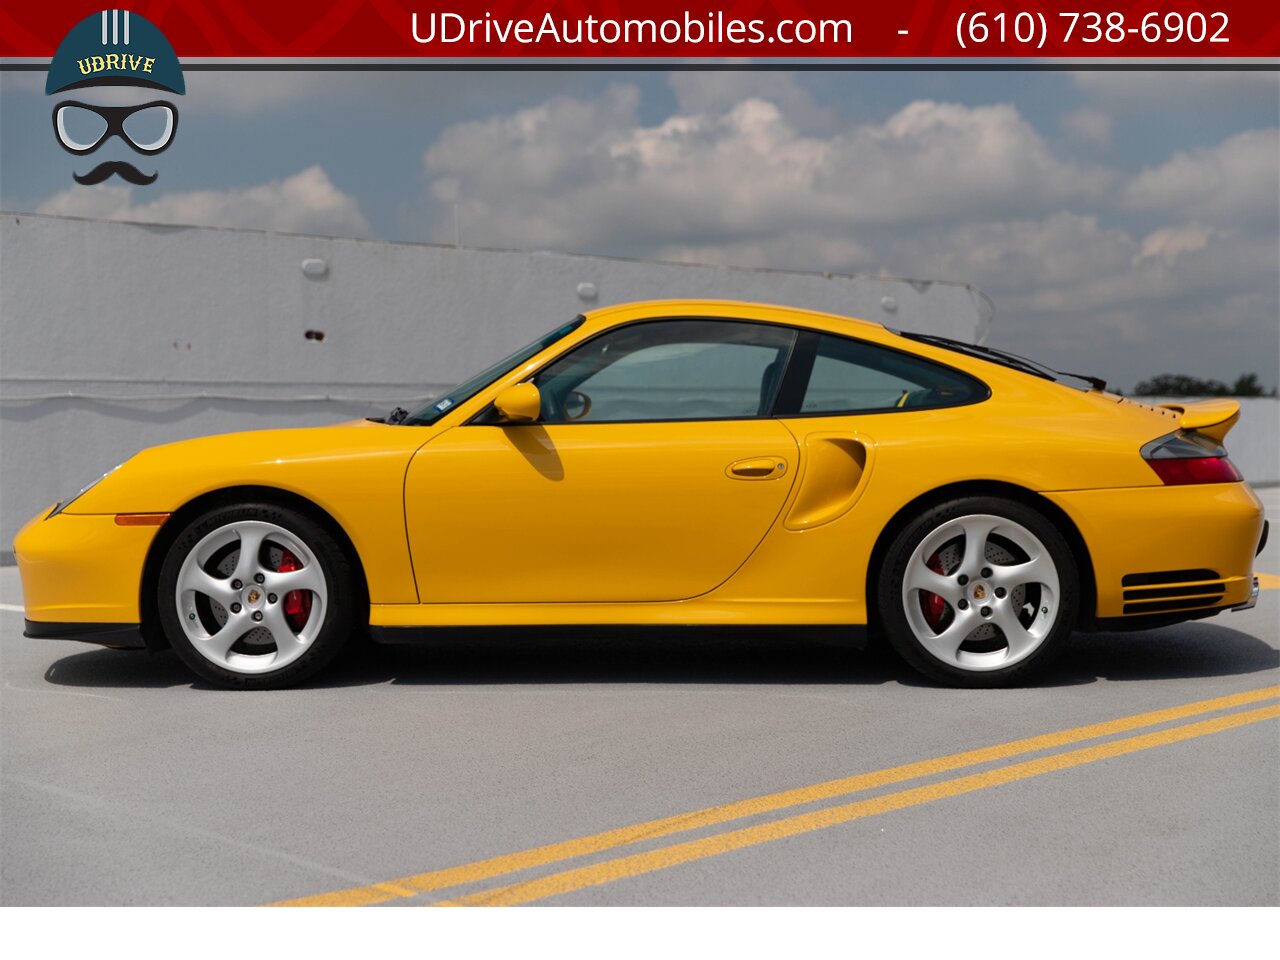 2003 Porsche 911 996 Turbo X50 6Sp Nephrite Green Lthr 9k Miles  Deviating Yellow Stitching Collector Grade BACK AGAIN - Photo 6 - West Chester, PA 19382